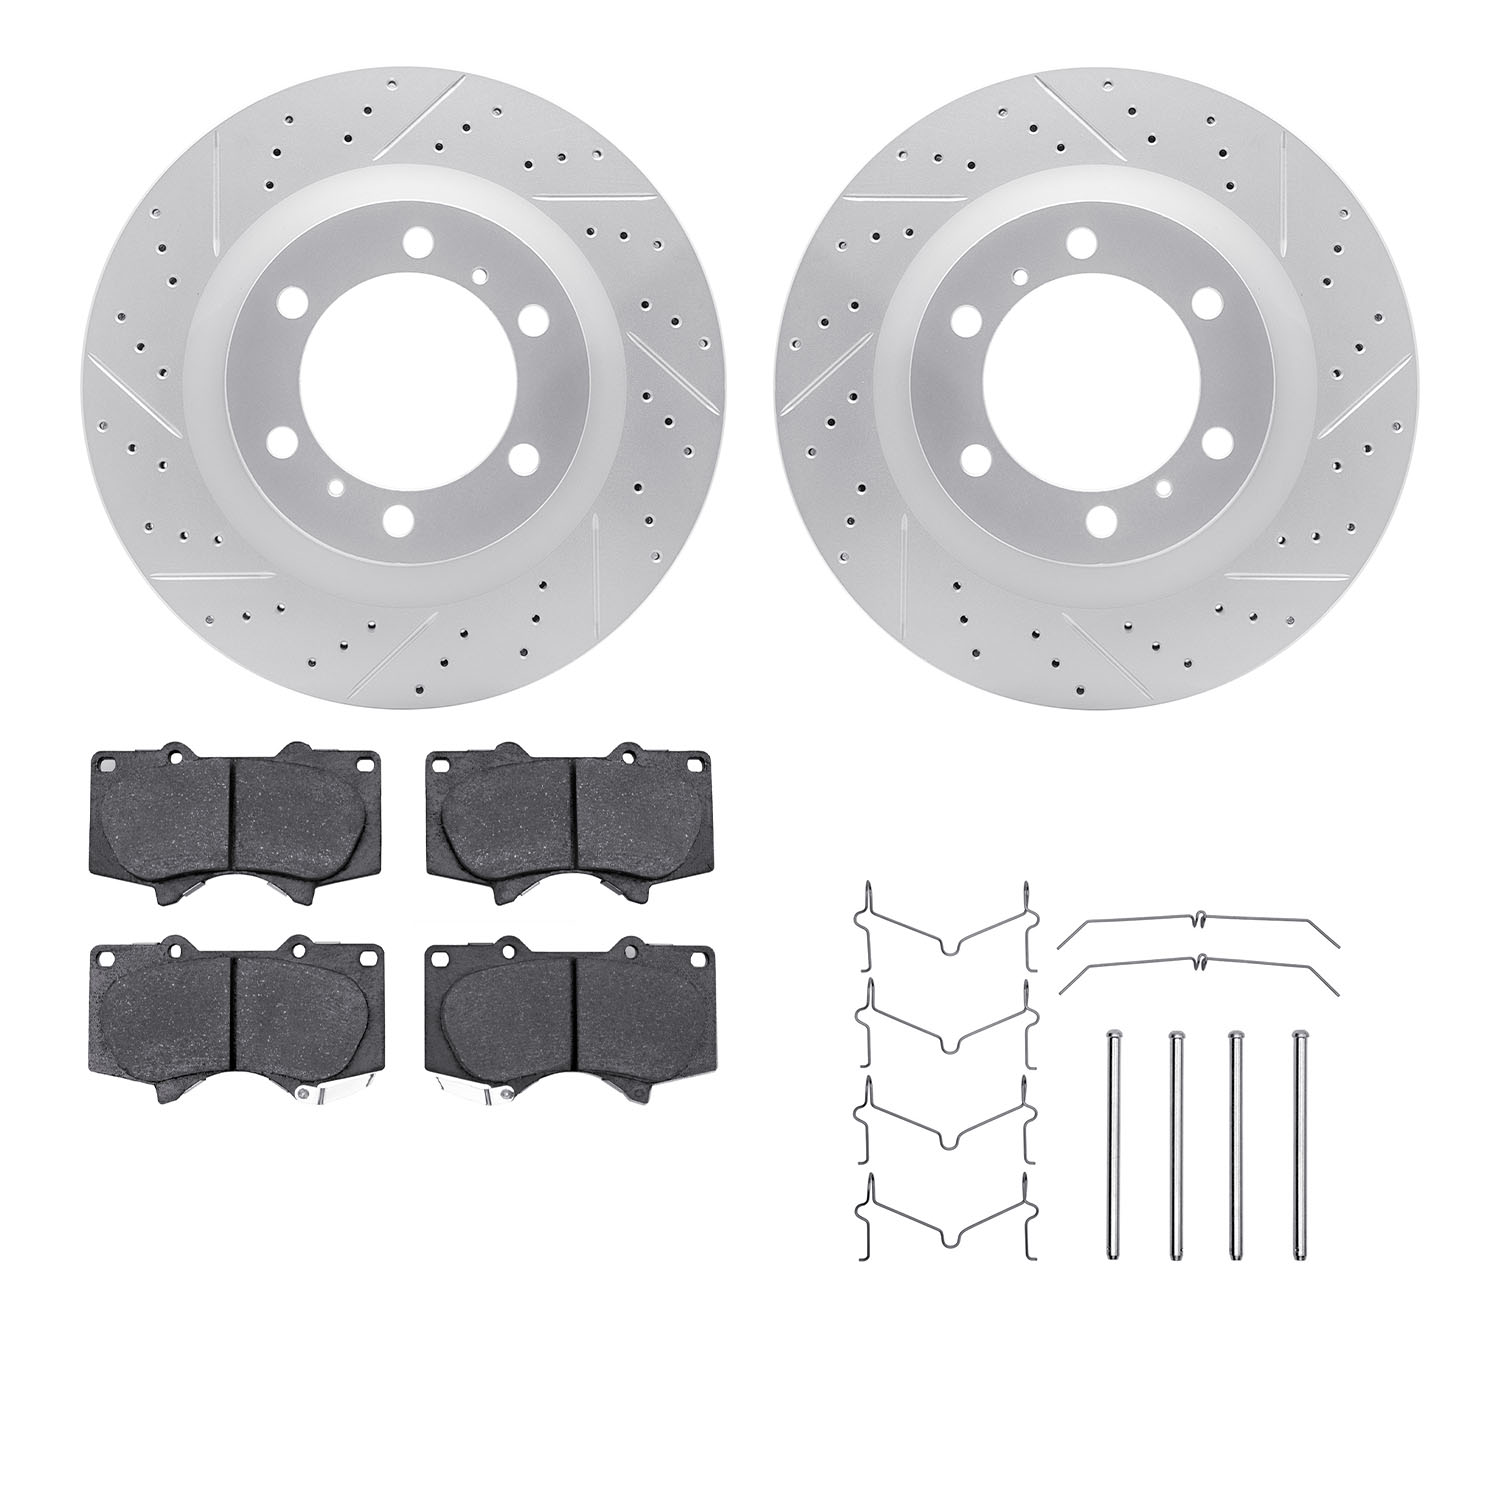 2212-76008 Geoperformance Drilled/Slotted Rotors w/Heavy-Duty Pads Kit & Hardware, Fits Select Lexus/Toyota/Scion, Position: Fro